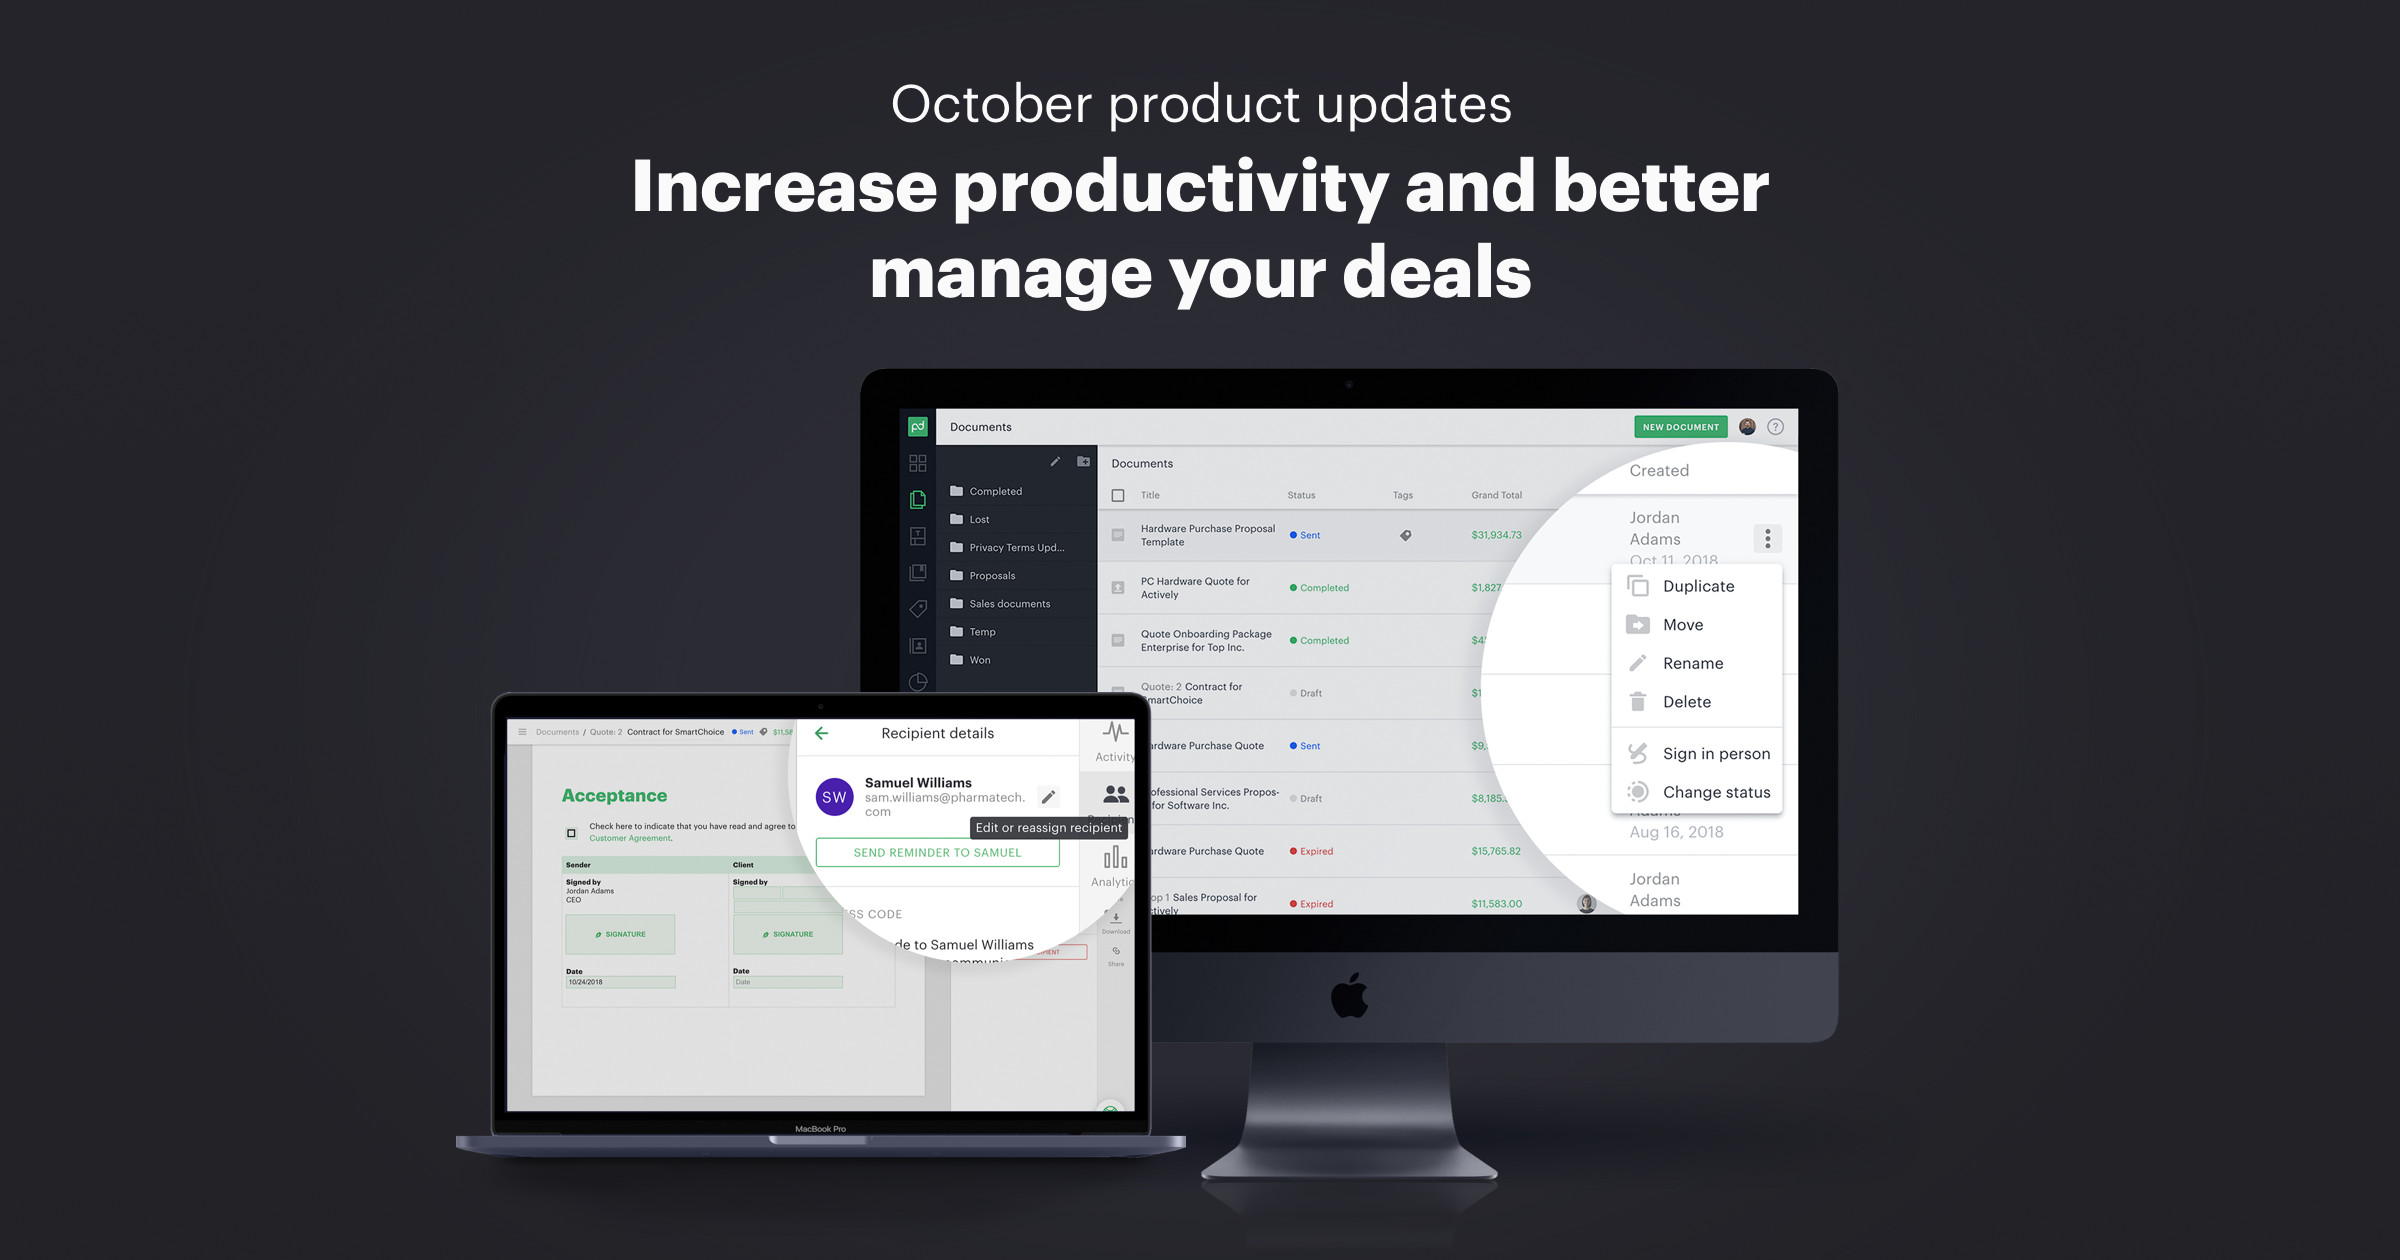 October product updates to help you increase productivity and better manage your deals